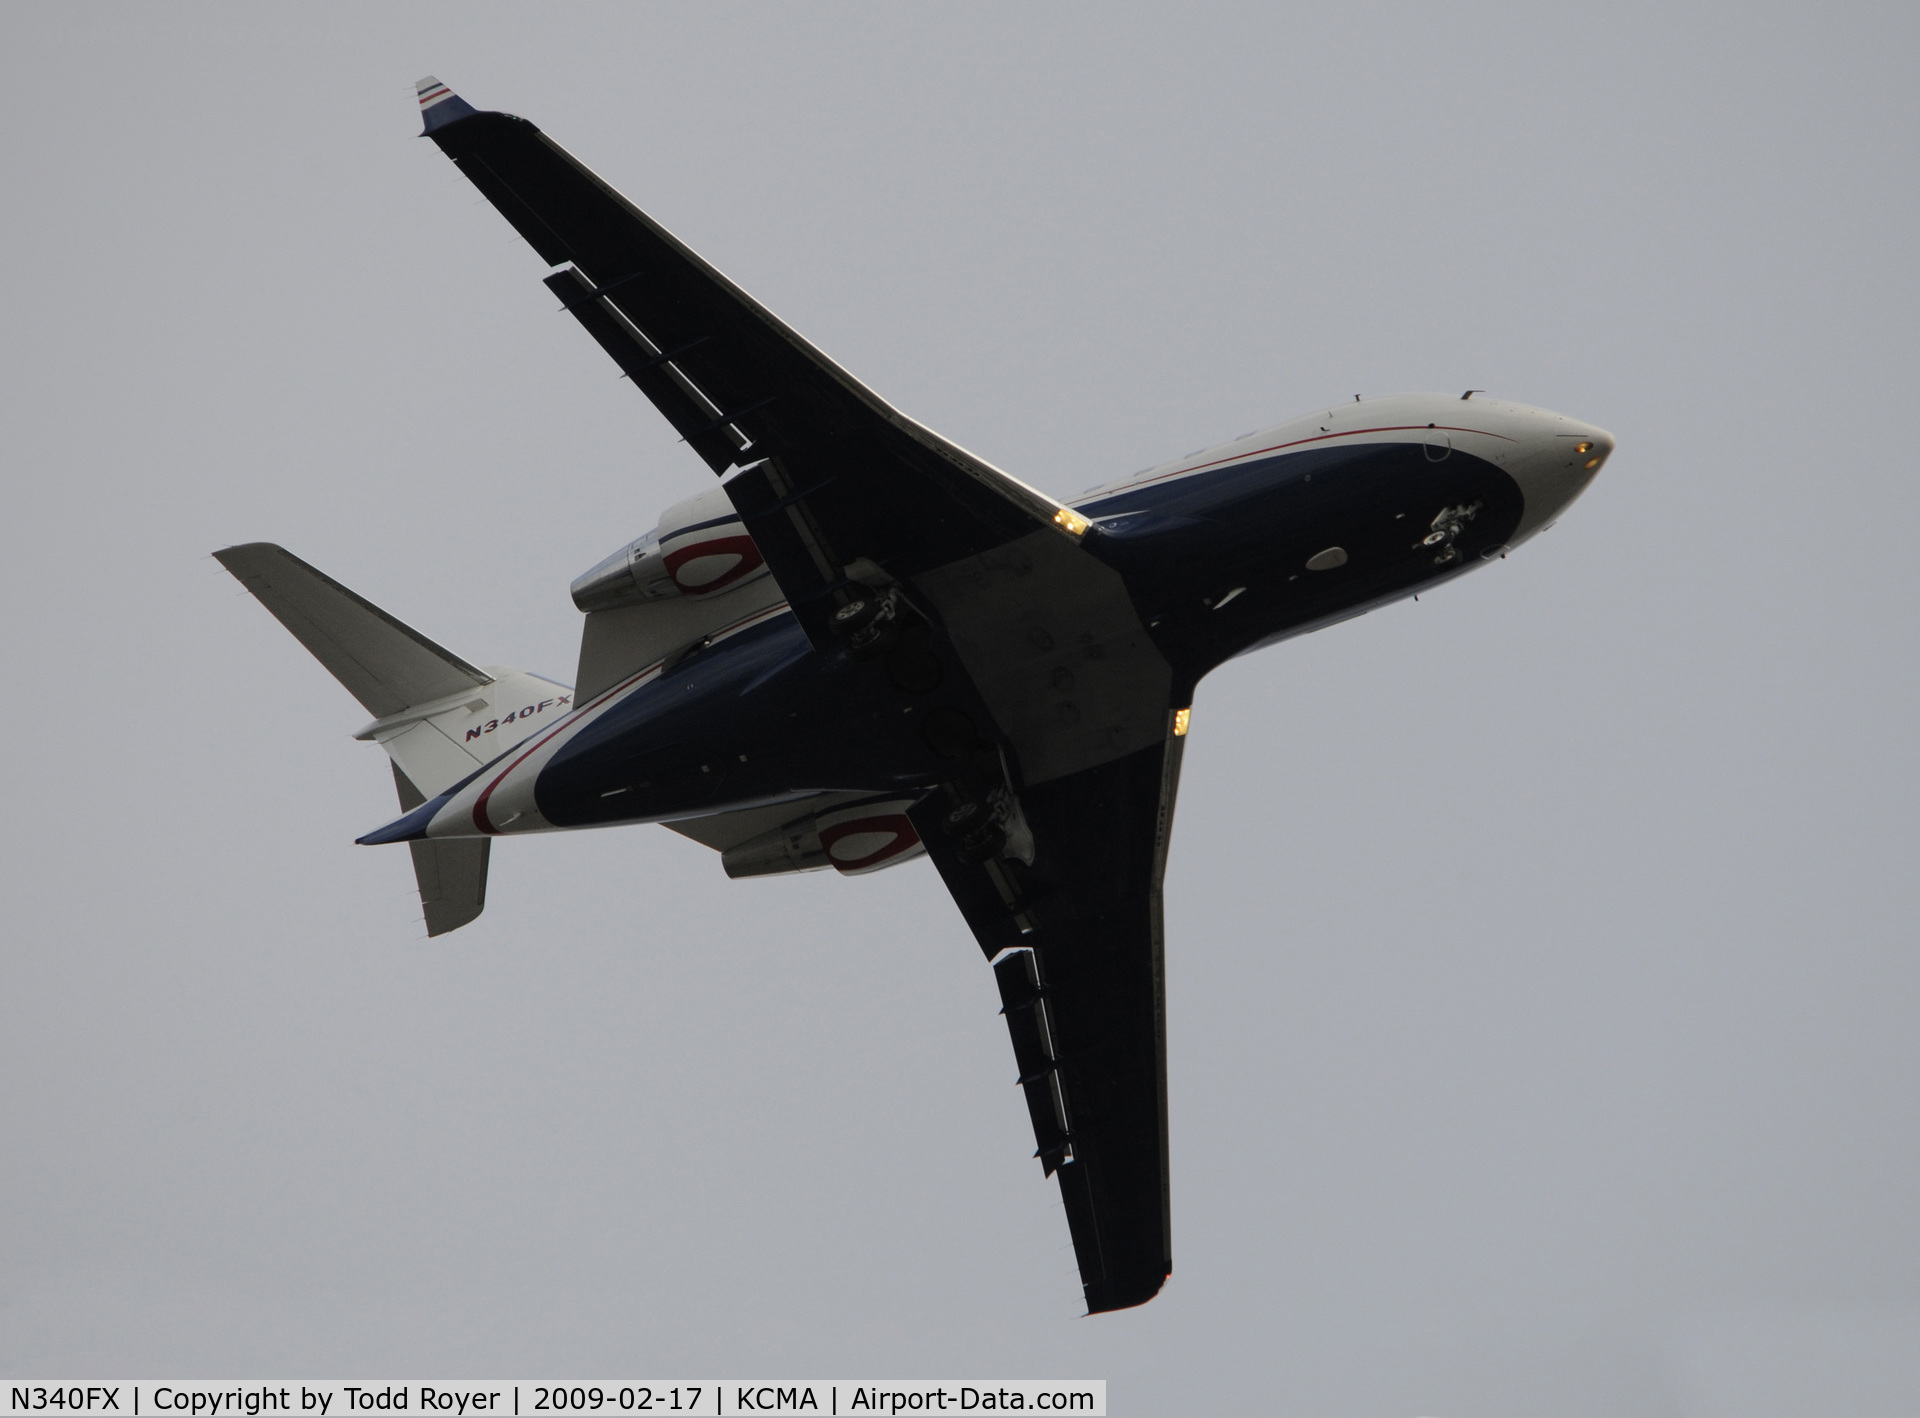 N340FX, 2007 Bombardier Challenger 605 (CL-600-2B16) C/N 5723, From the backyard